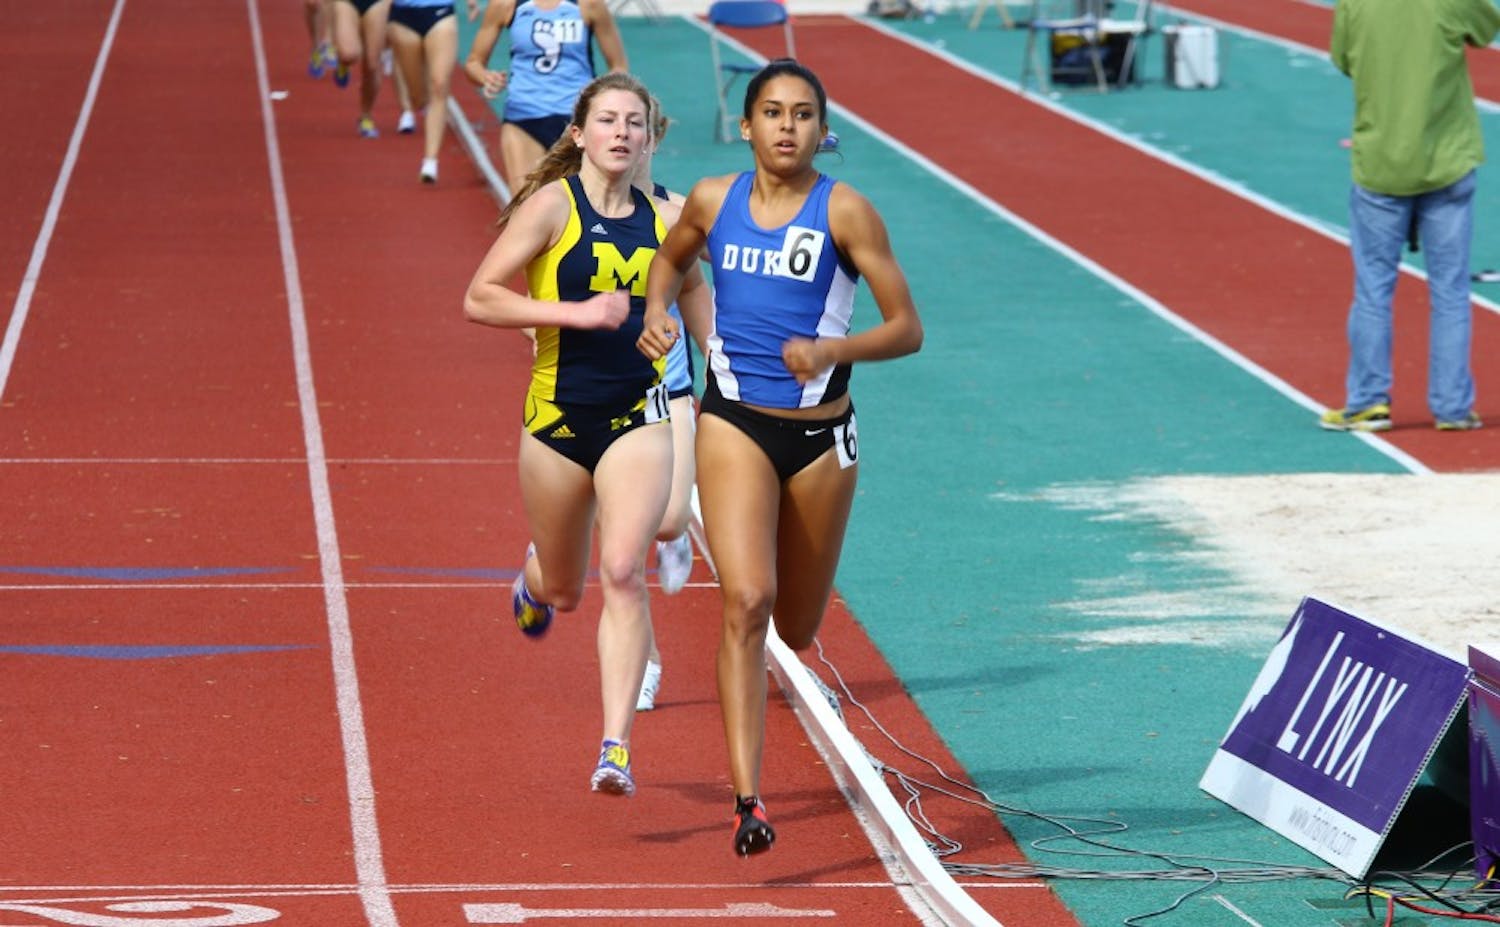 Anima Banks will compete in several events throughout the weekend as she looks to help the Blue Devils earn their first-ever conference title on the women's side.&nbsp;